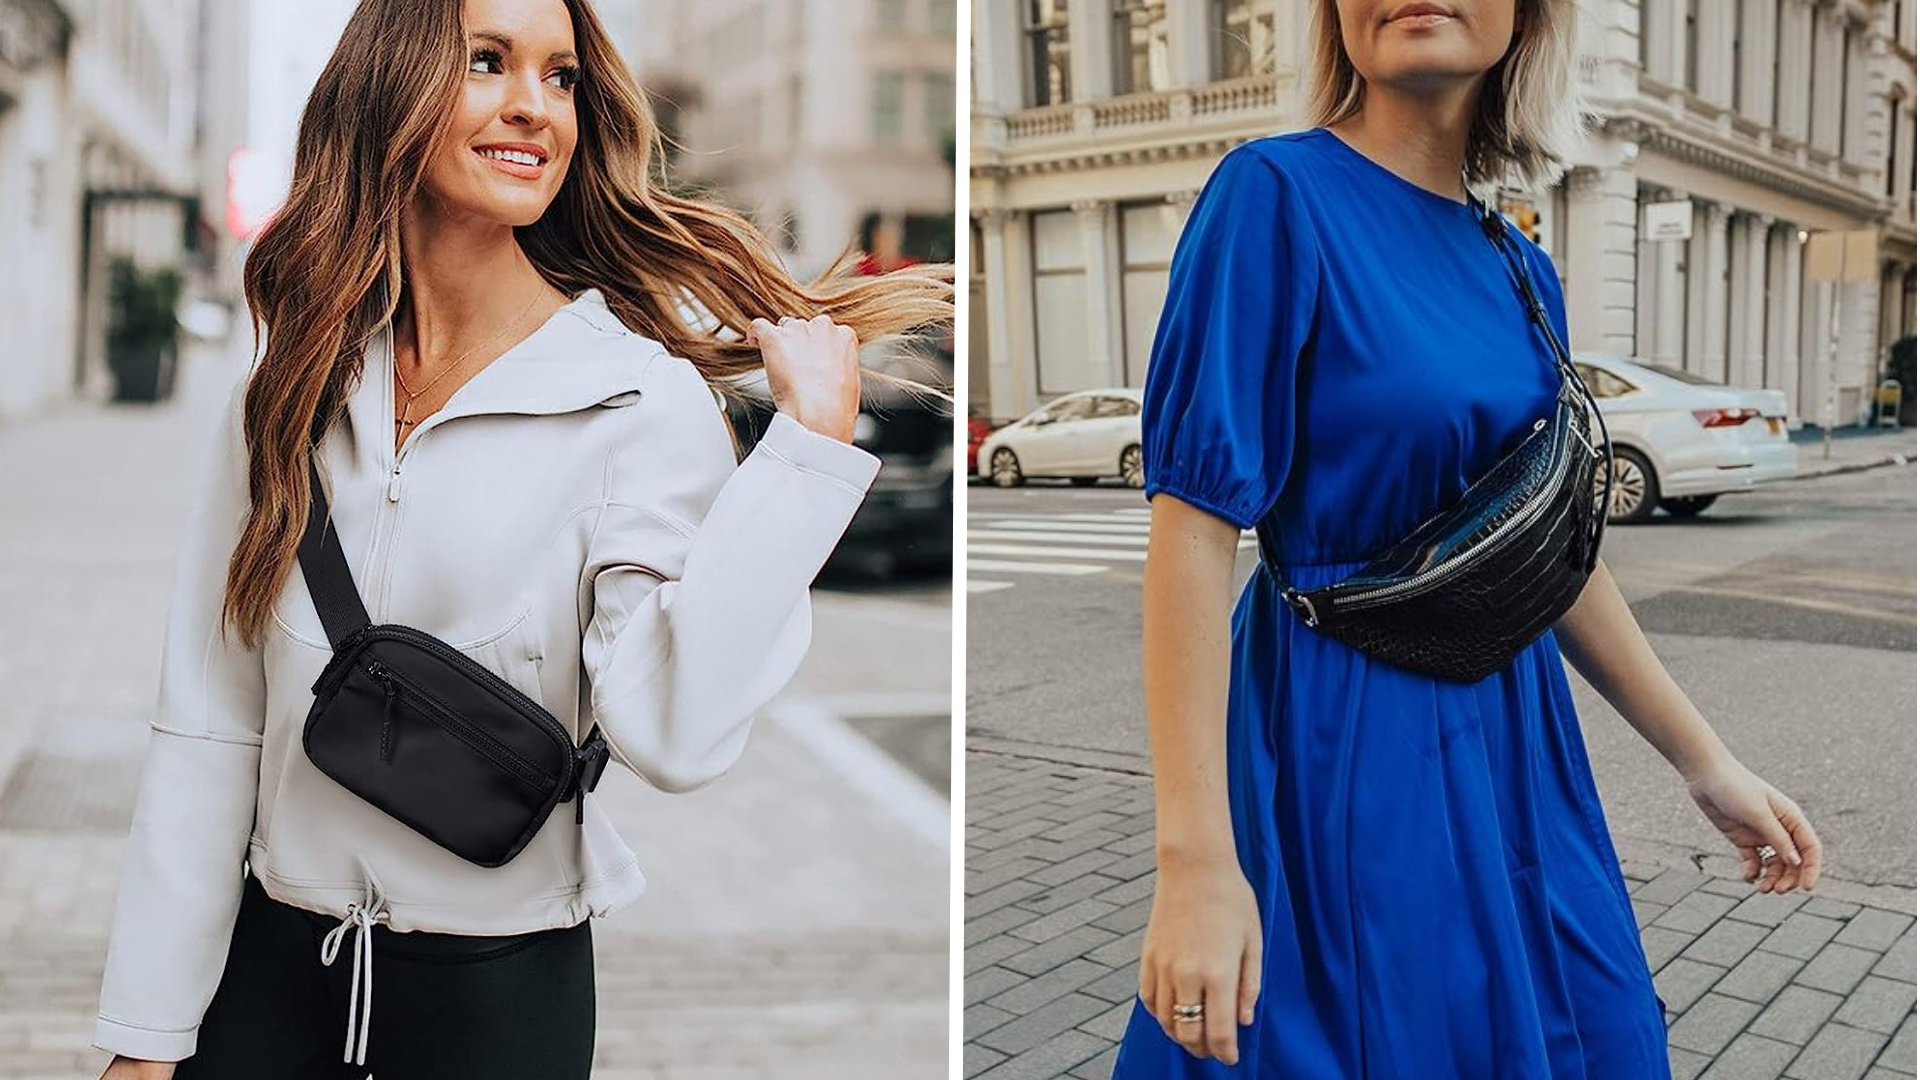 Crossbody Bag or Fanny Pack for Travel? (the choice is EASY!) 